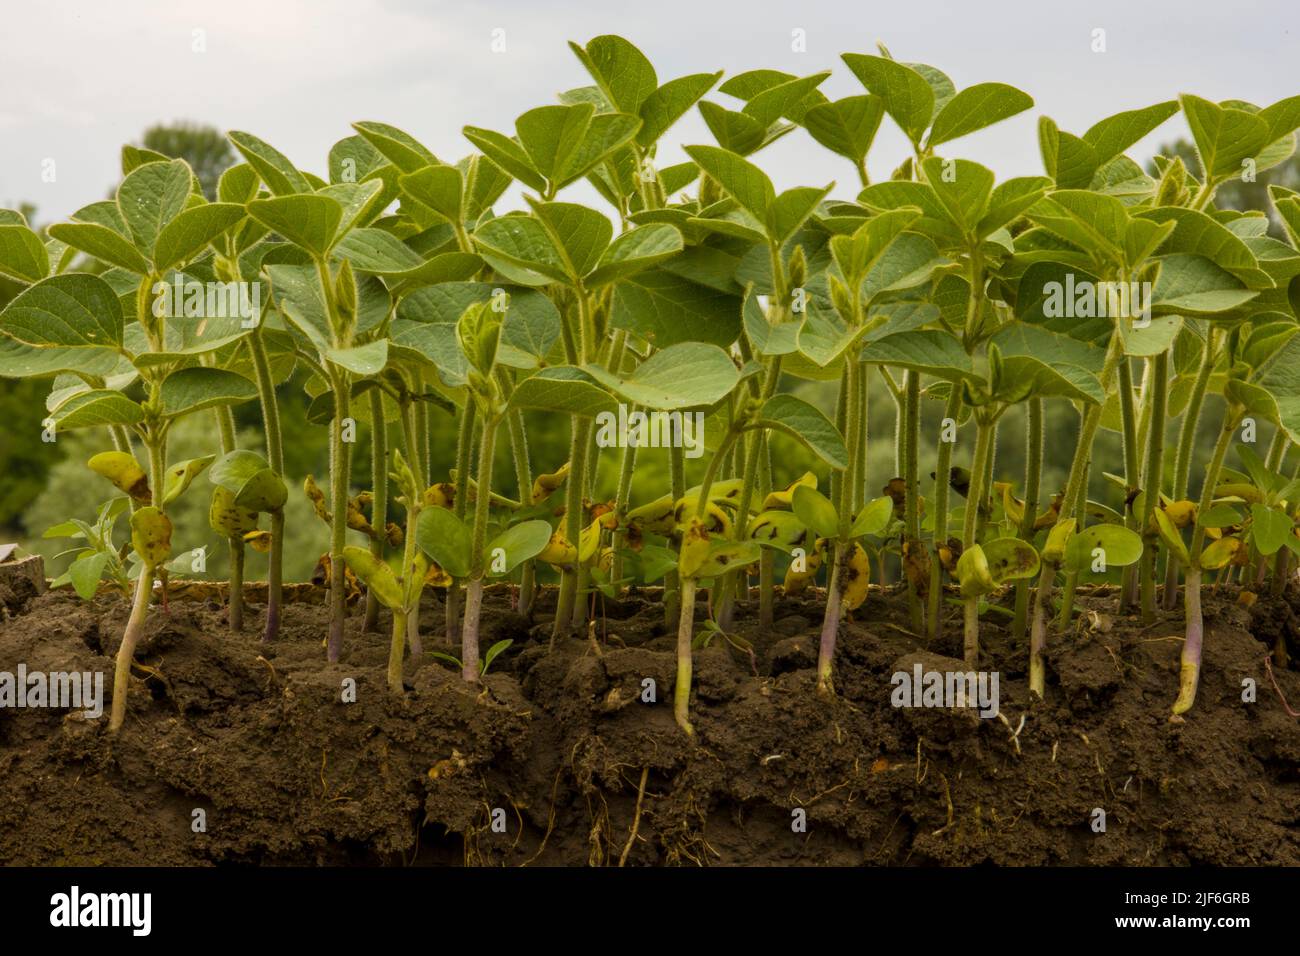 Young shoots of soybeans with roots. Blurred background. Stock Photo